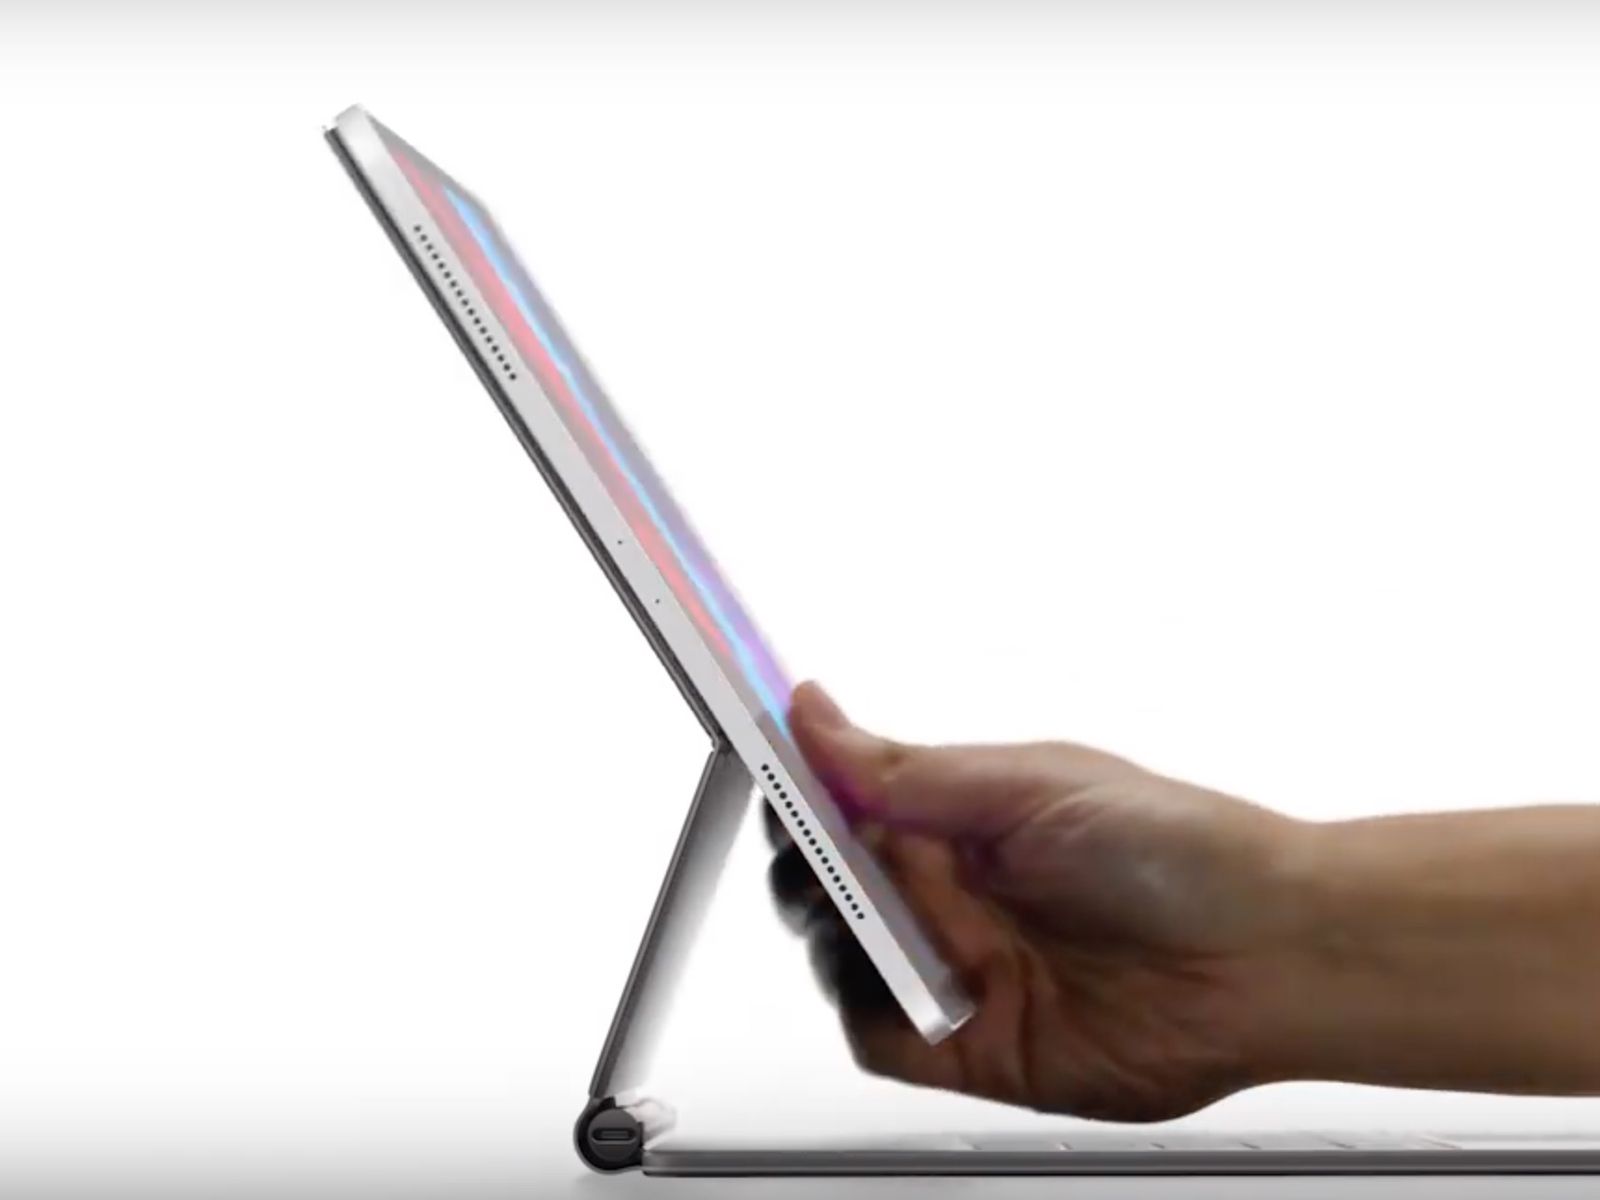 Apple S New Magic Keyboard With Integrated Trackpad Compatible With 18 Ipad Pro Models Macrumors